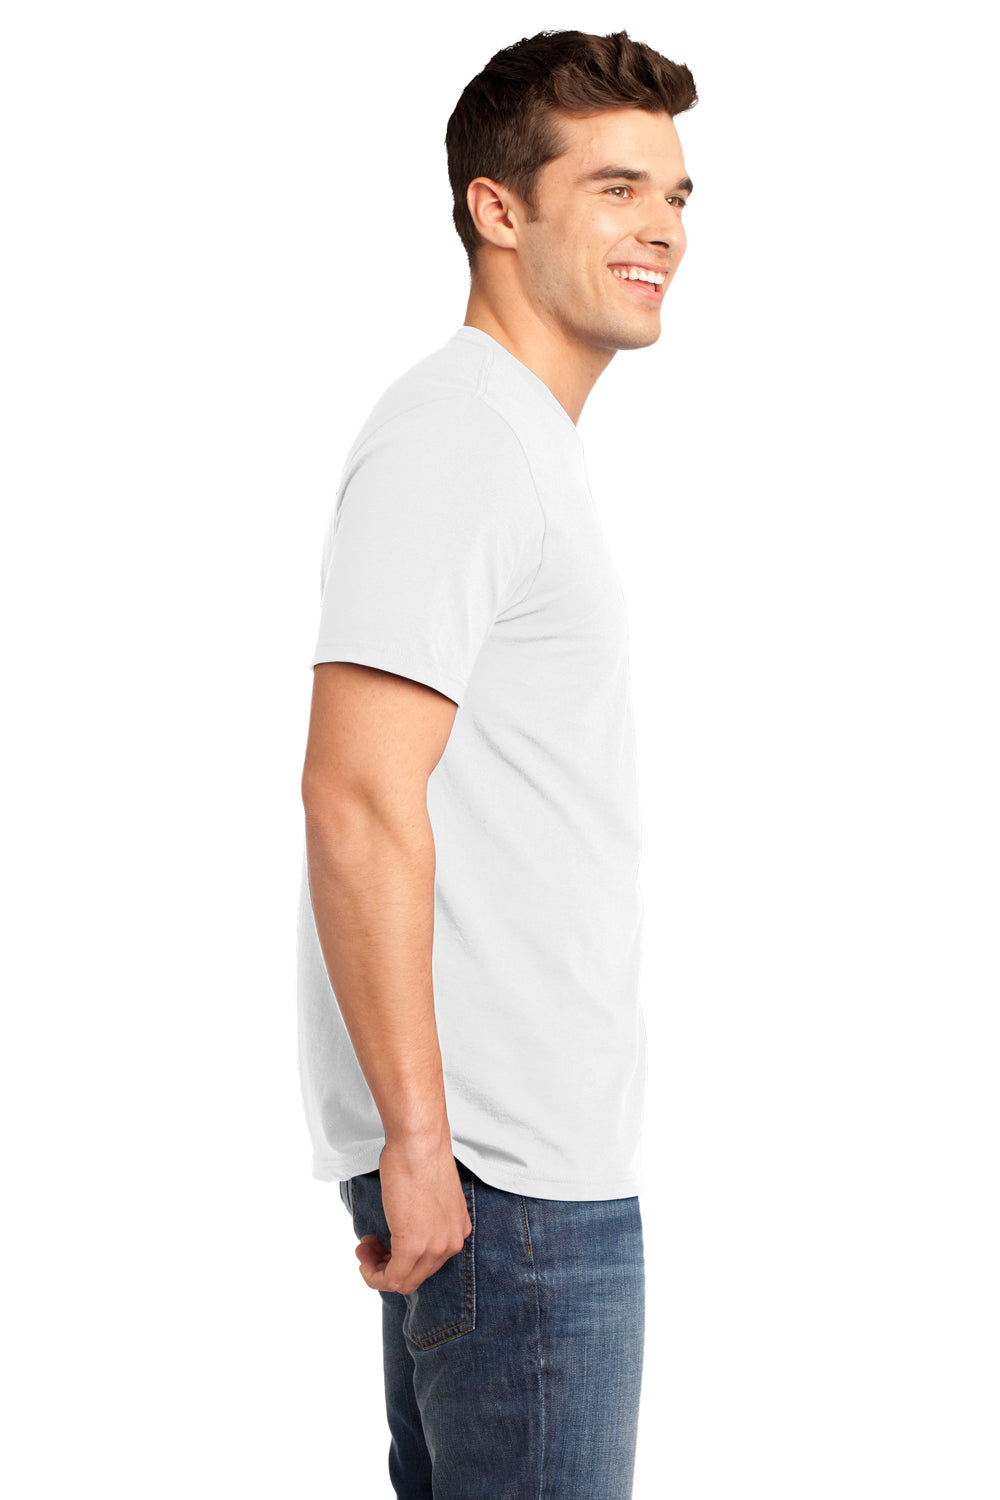 District DT6000 Mens Very Important Short Sleeve Crewneck T-Shirt White Side